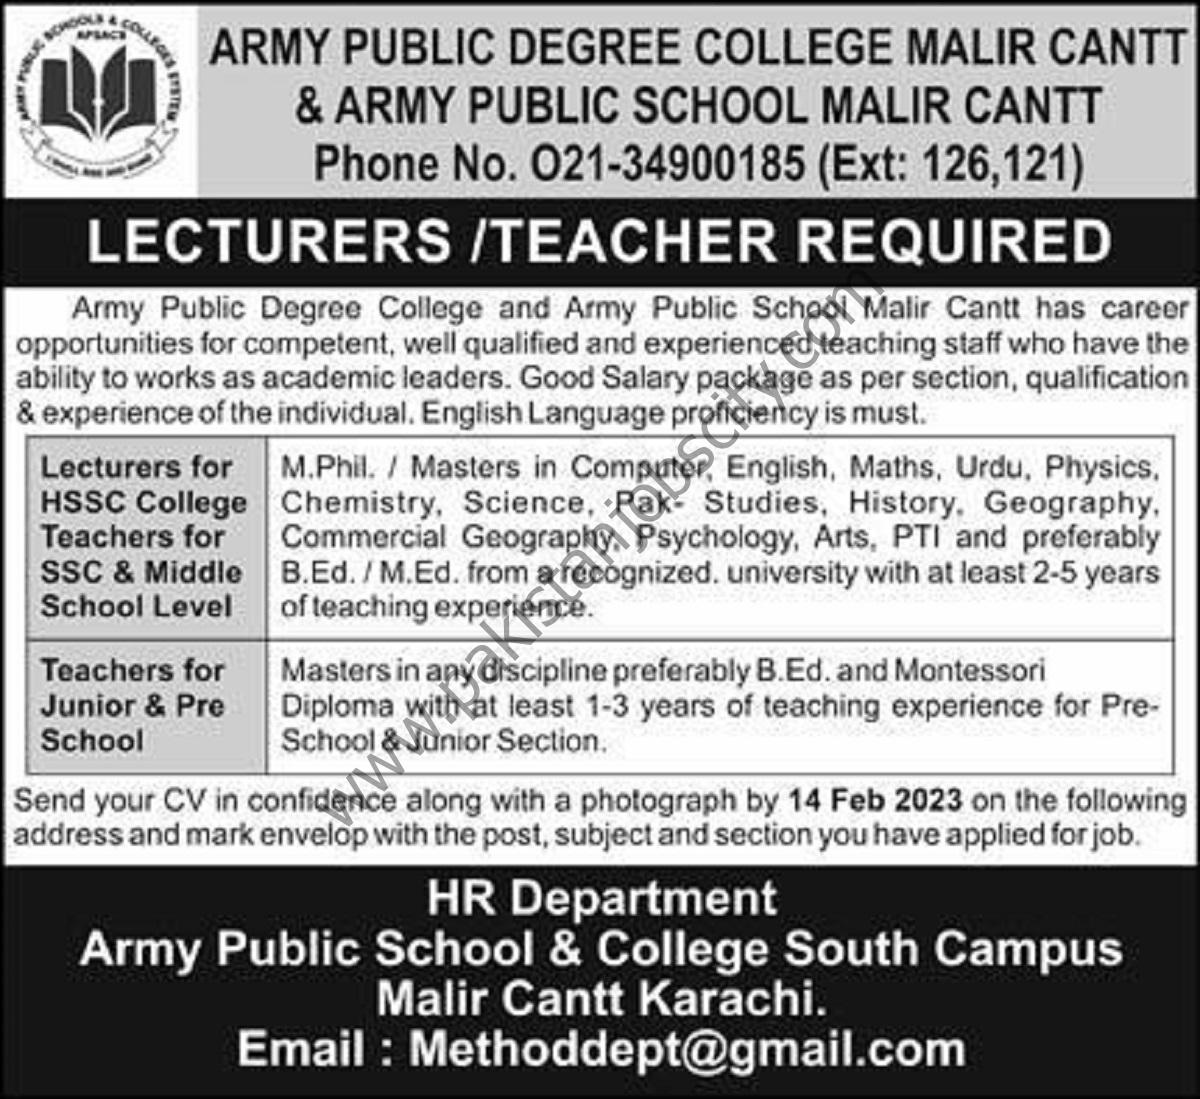 Army Public Degree College Malir Cantt Jobs 05 February 2023 Express 01